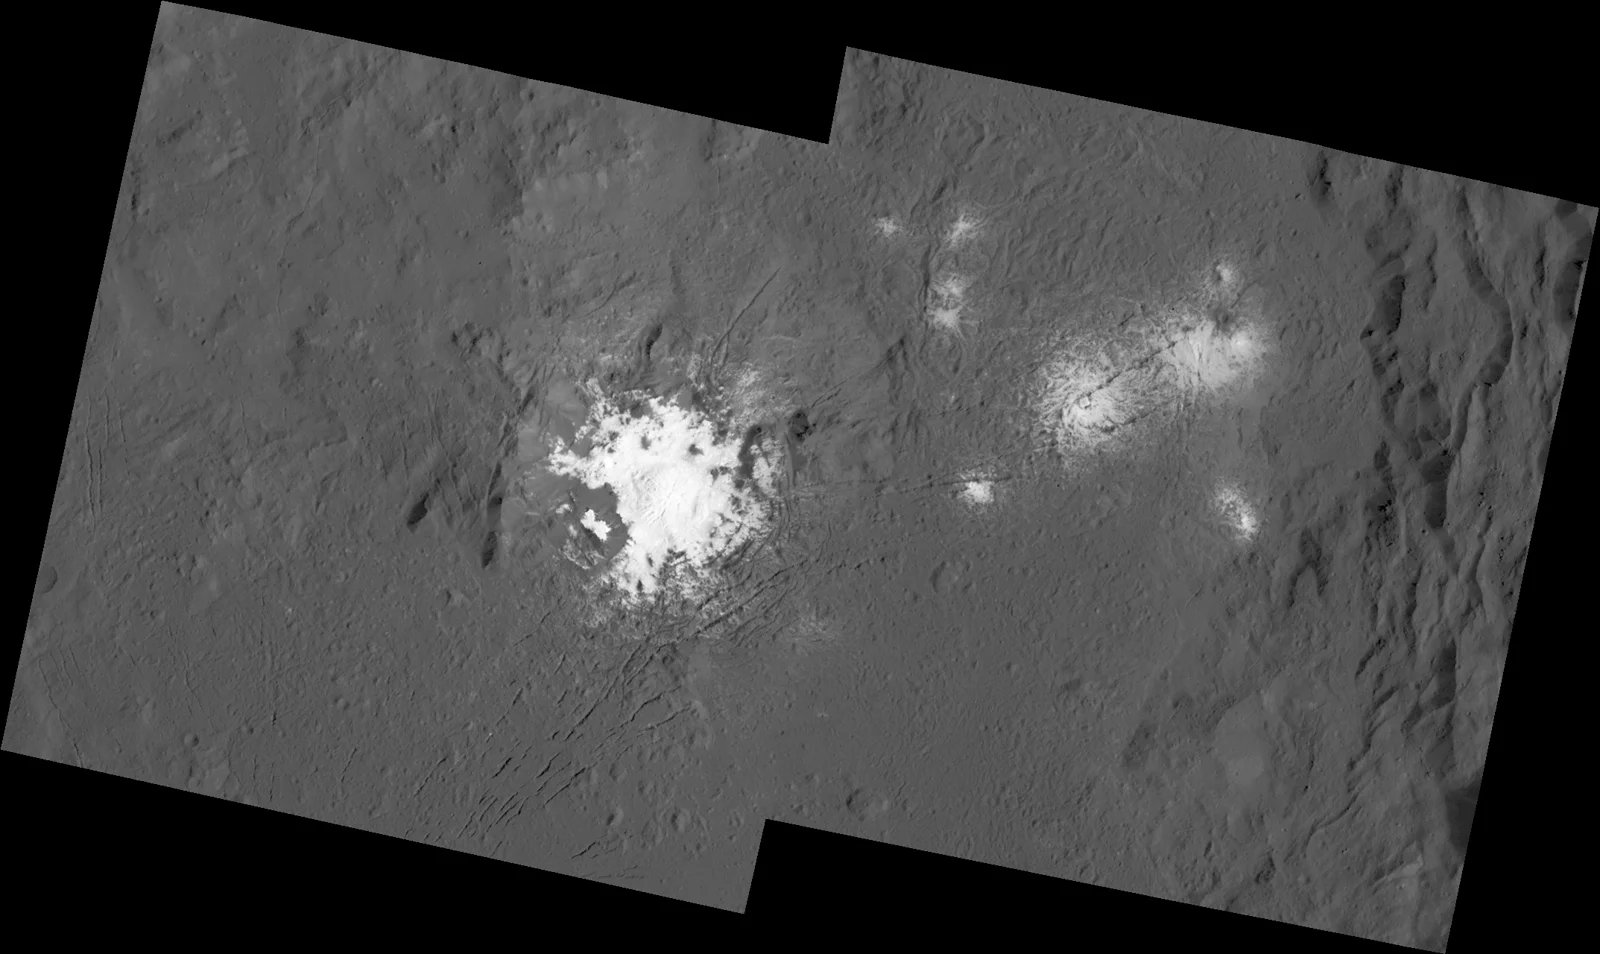 Occator Crater and Ceres Brightest Spots